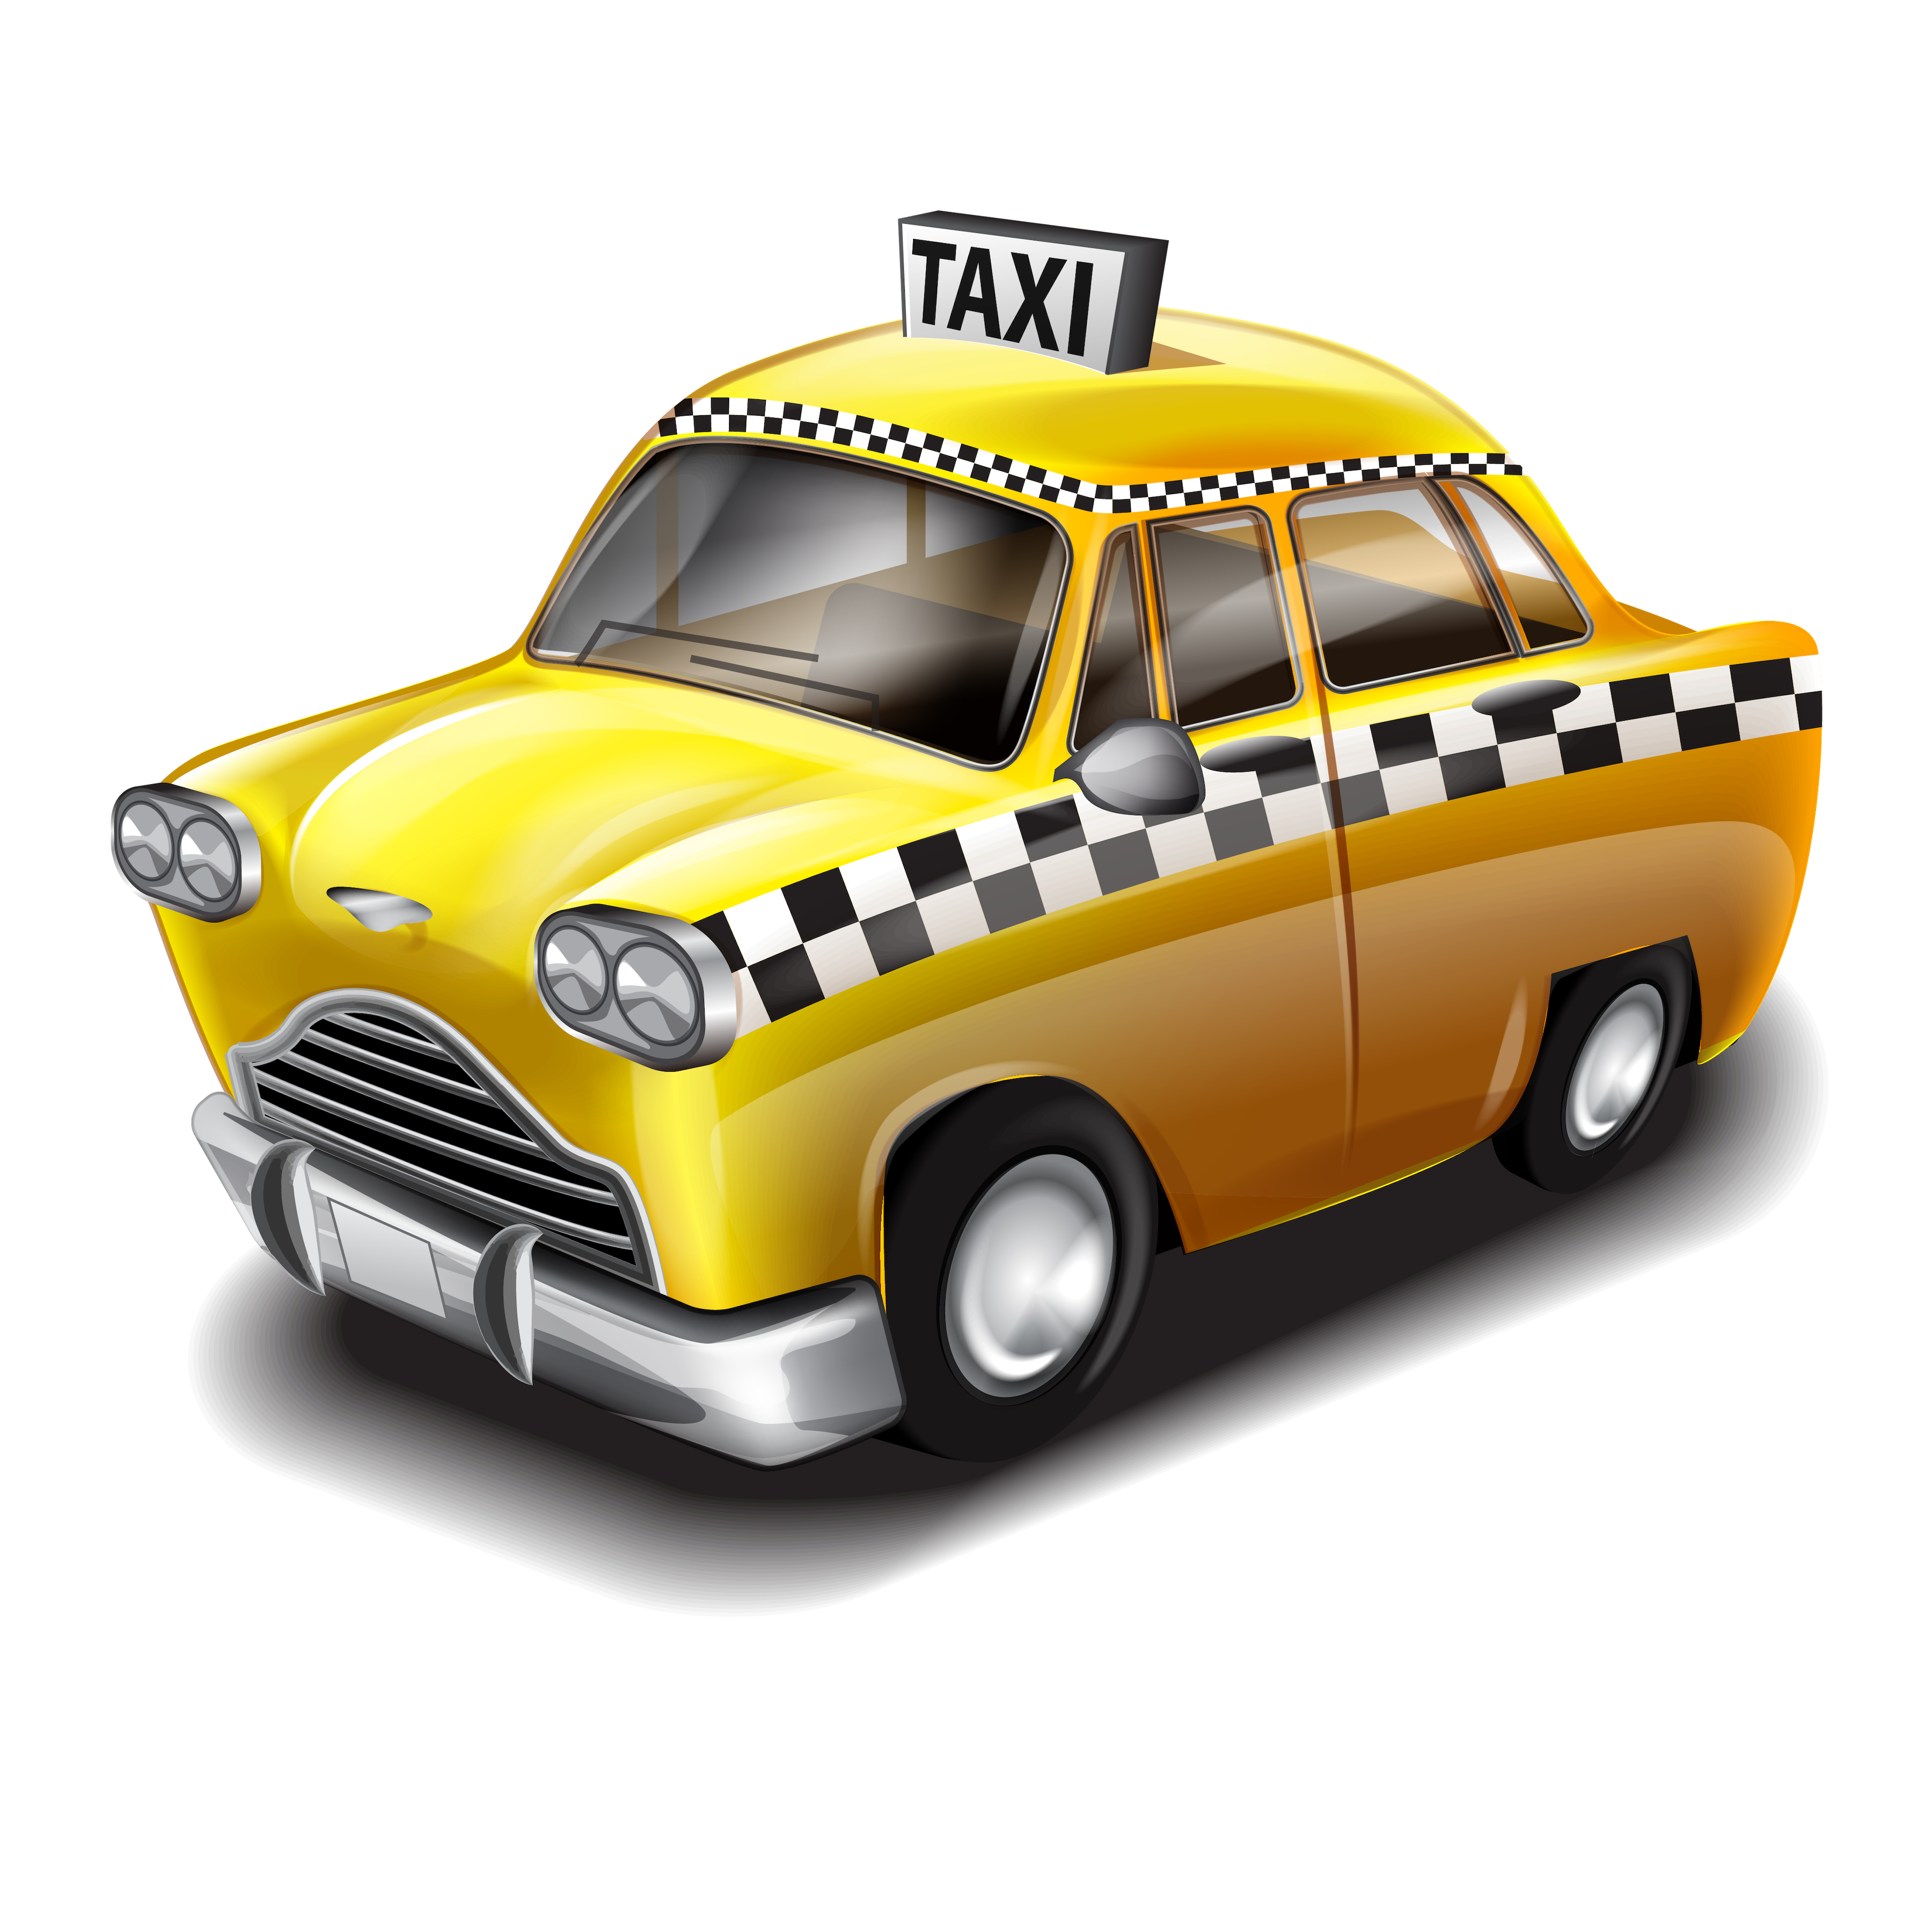 Taxi hry